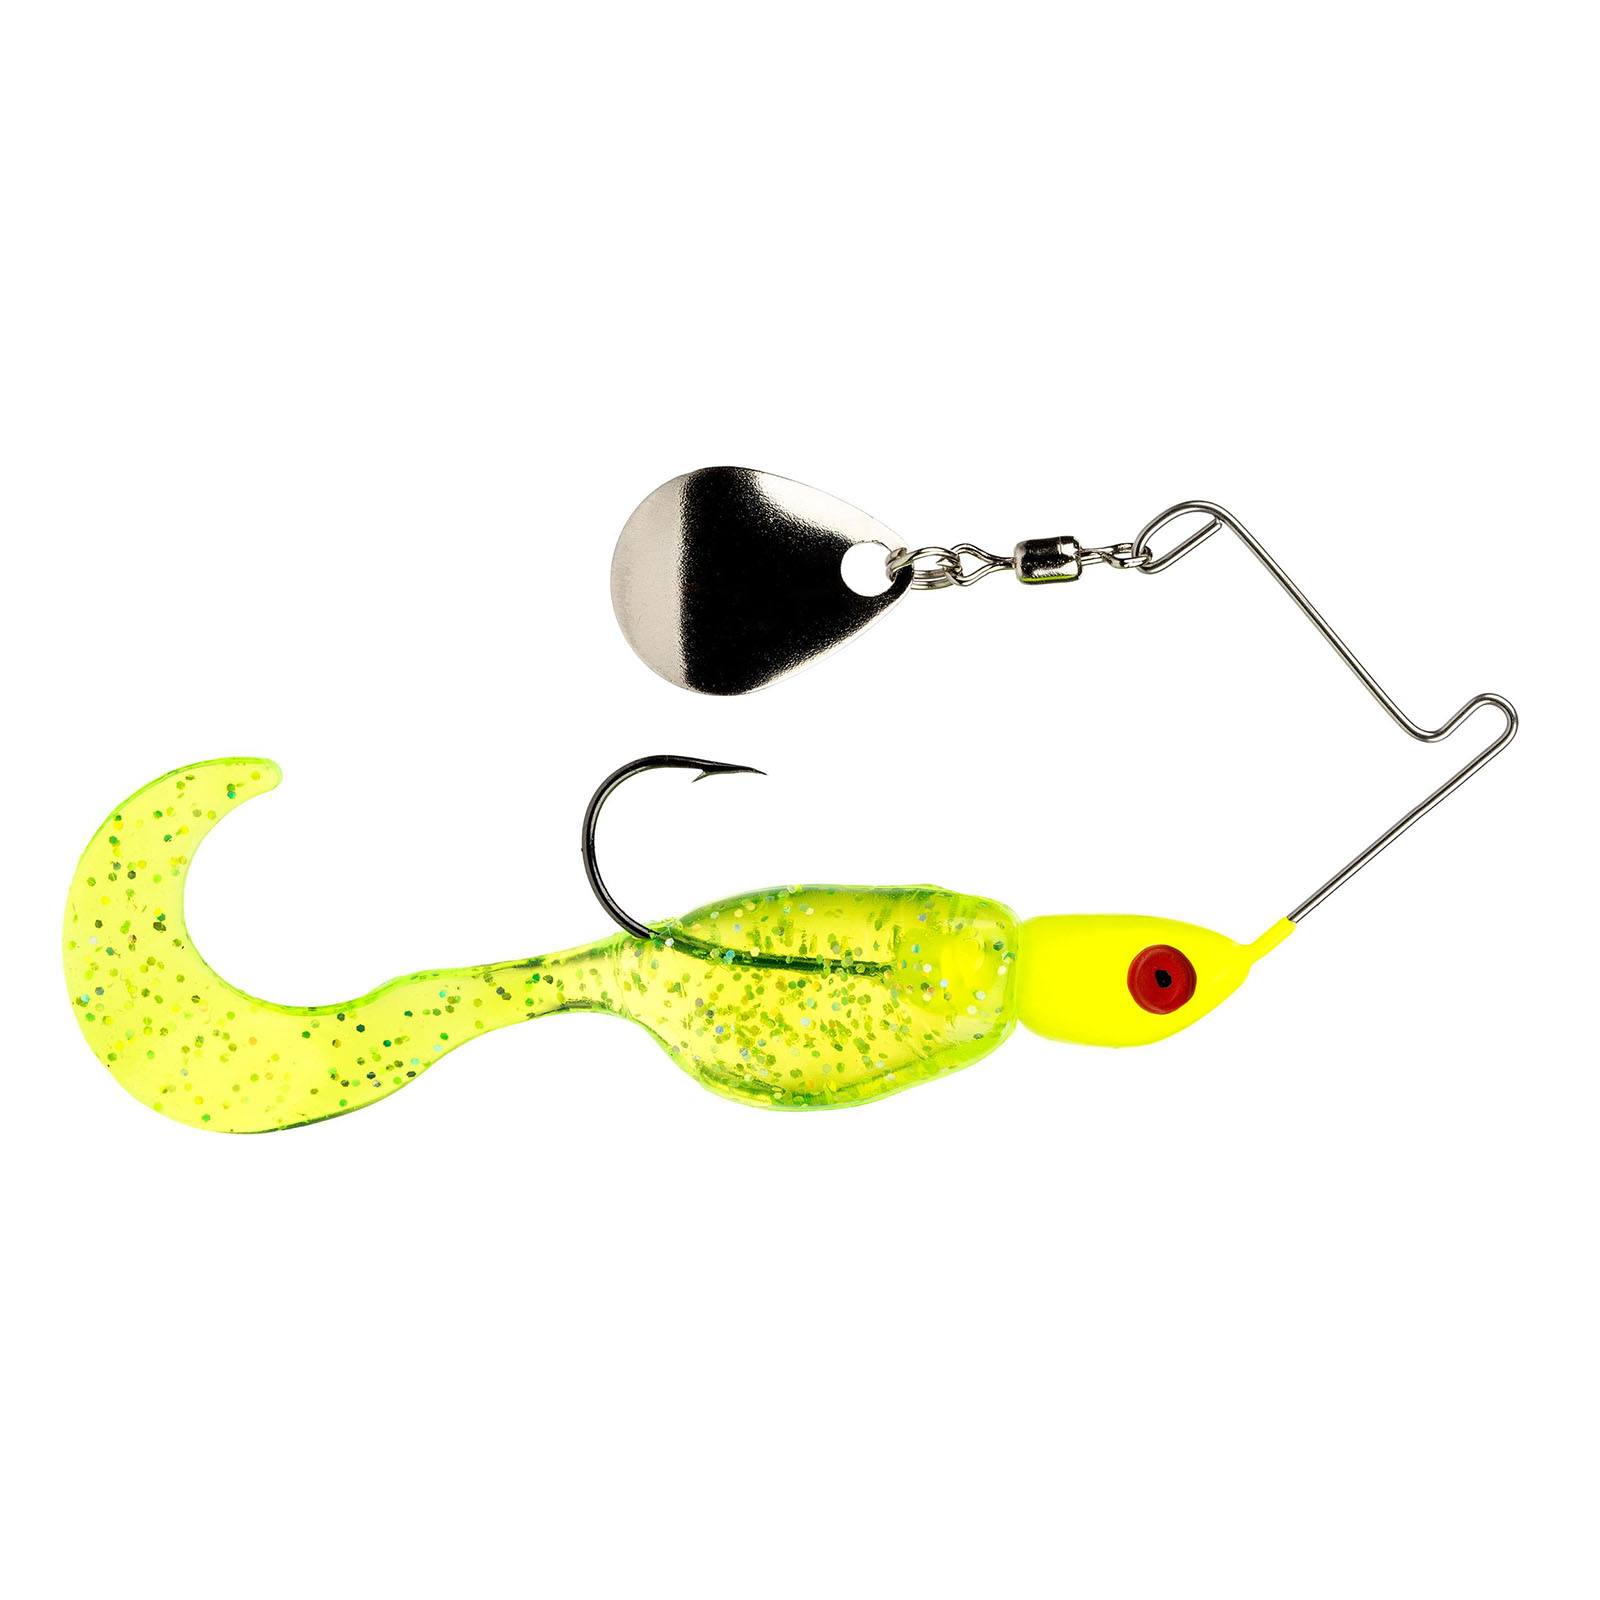 Strike King Mr. Crappie Spin Baby 1/8 oz. Chartreuse Shiner